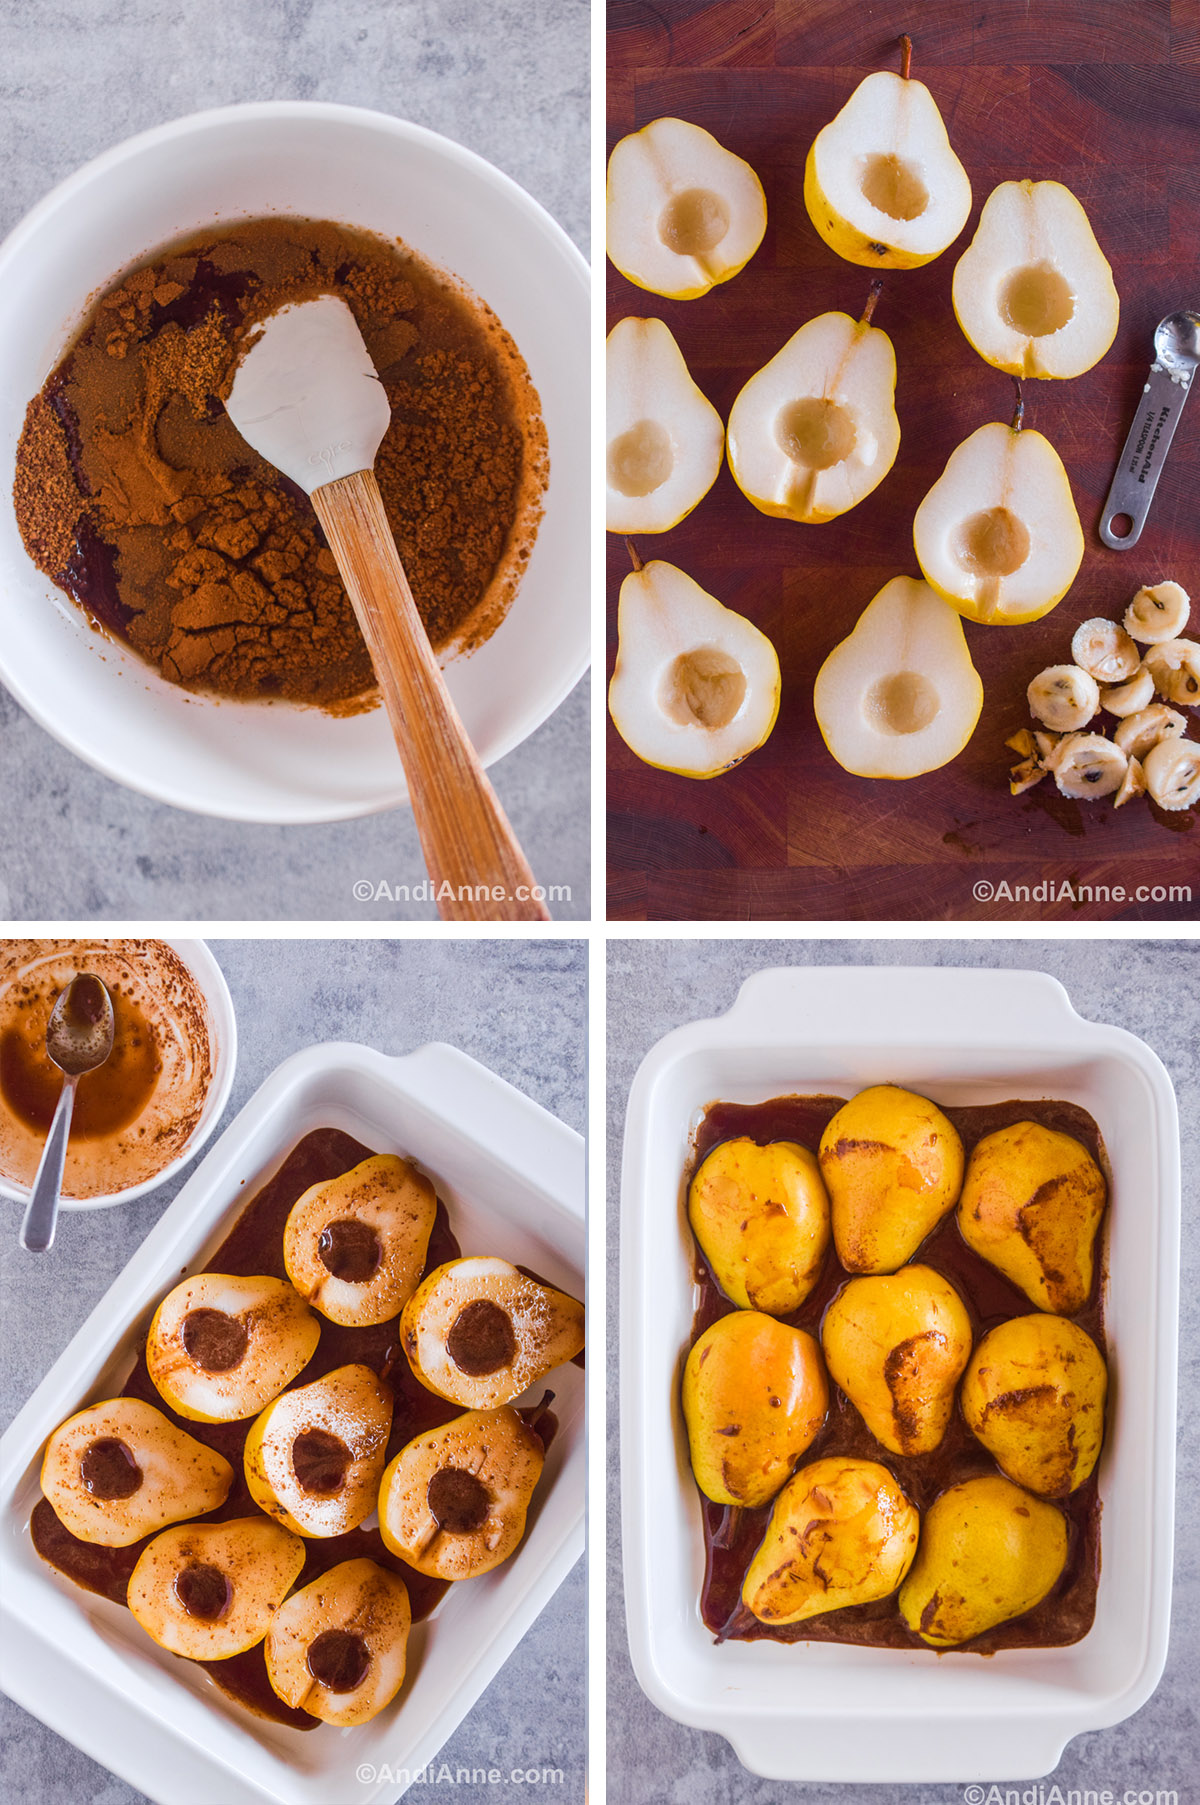 Four images showing steps to make the recipe including a white bowl with cinnamon and maple syrup with a spatula. Sliced pears with cores removed and a measuring spoon, Sliced pears in a white dish with a bowl of leftover sauce and a spoon, a white dish with pears facing down in brown sauce. 